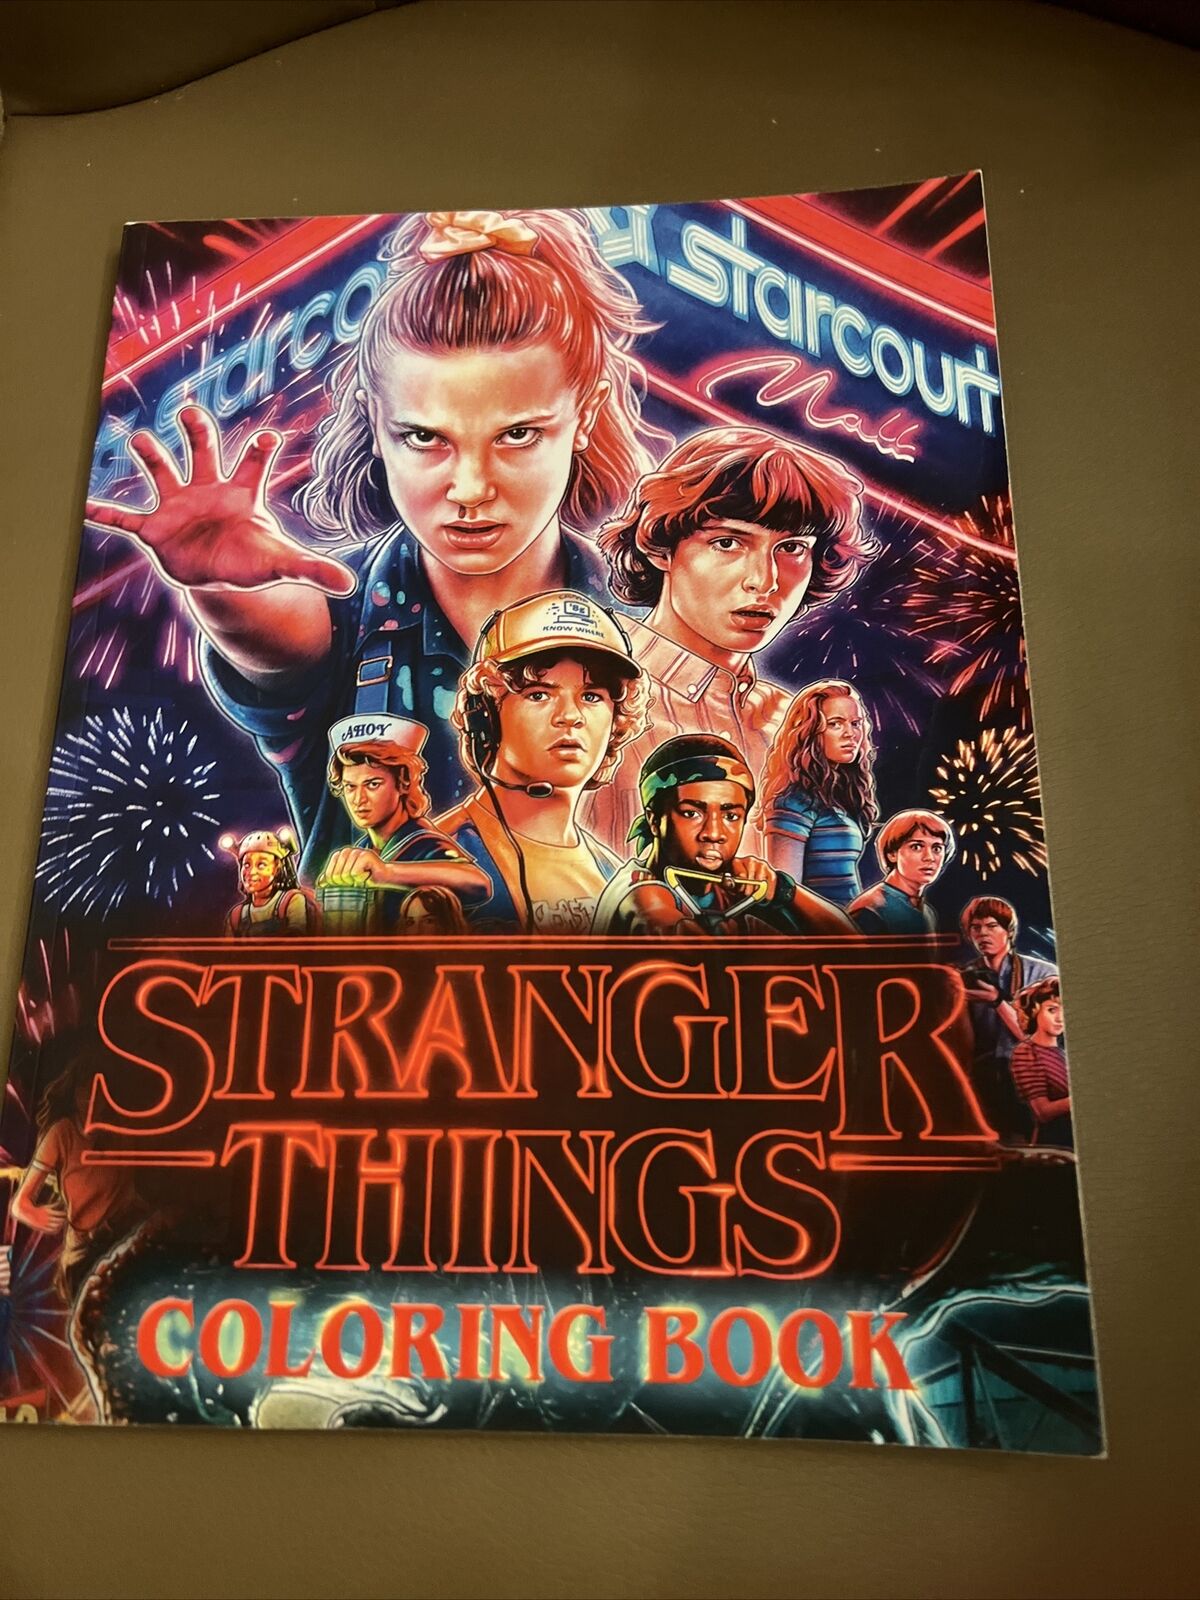 Stranger things coloring book by netflix english paperback book